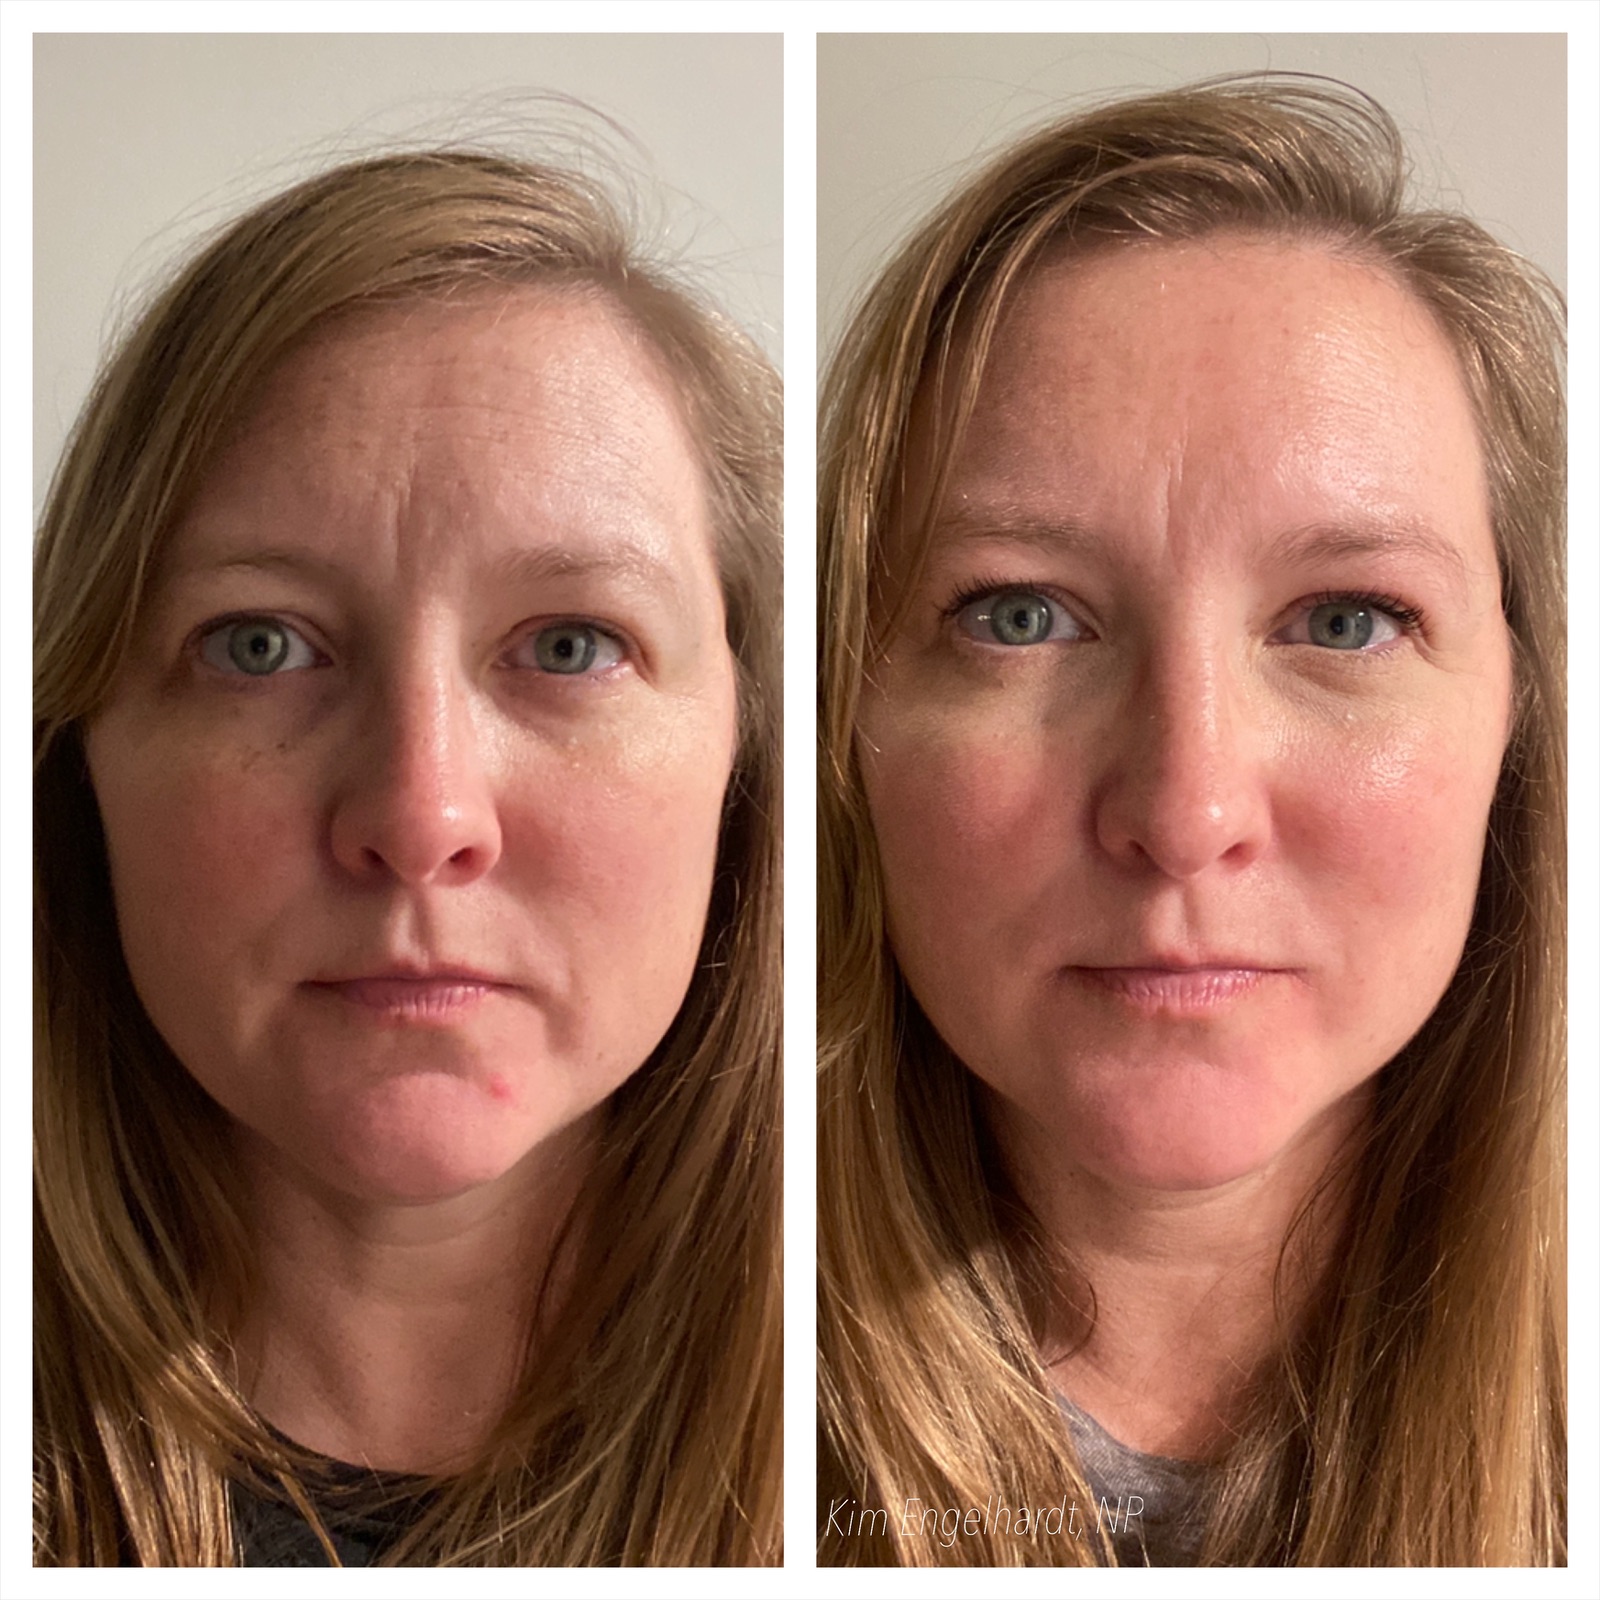 Chemical Peel Before and After Results